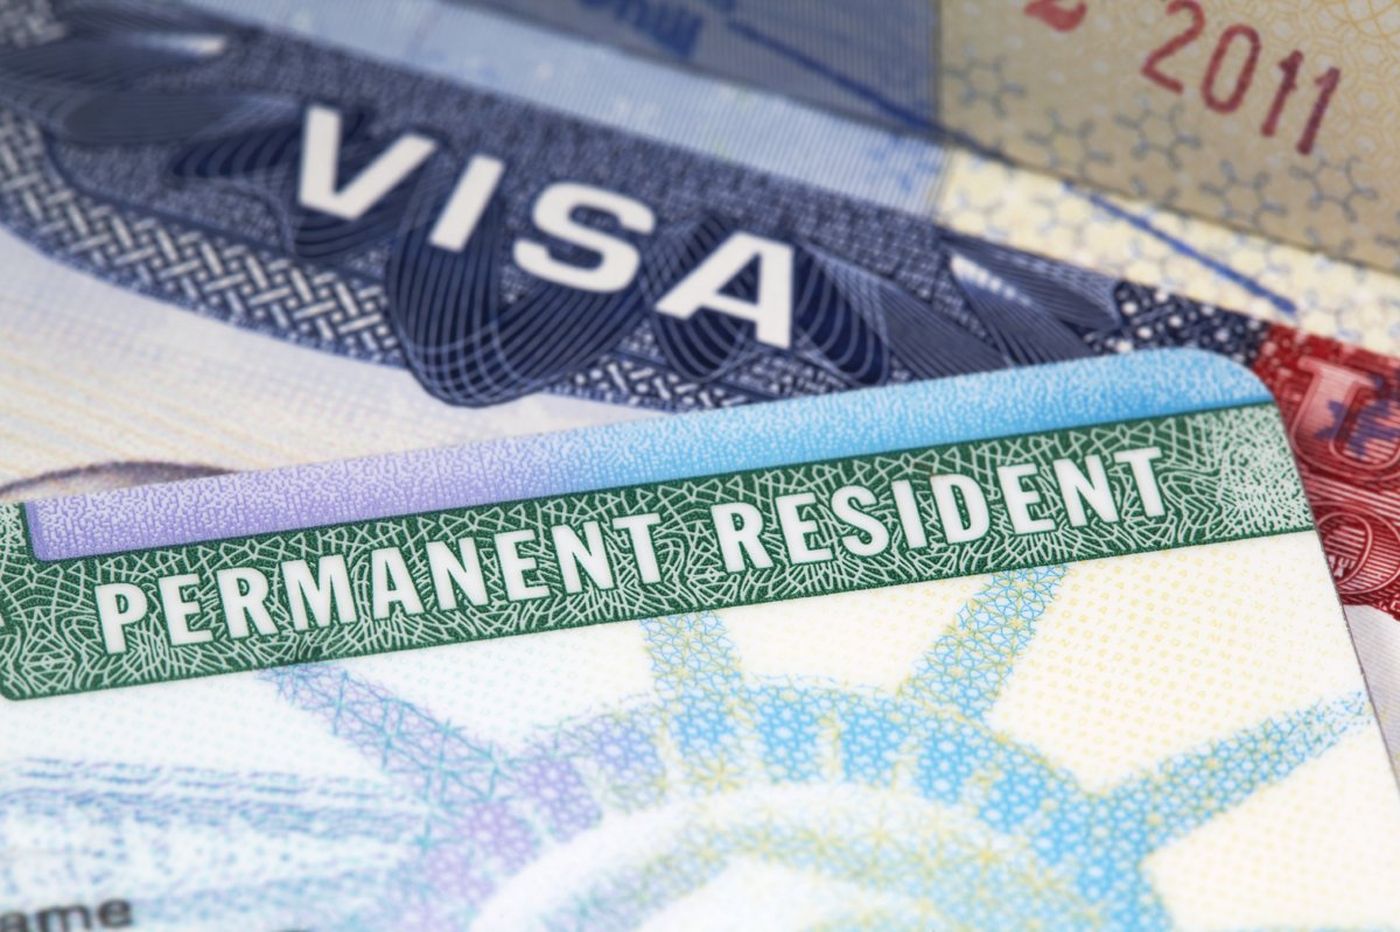 US can reject visa, green card applications for errors or missing documents